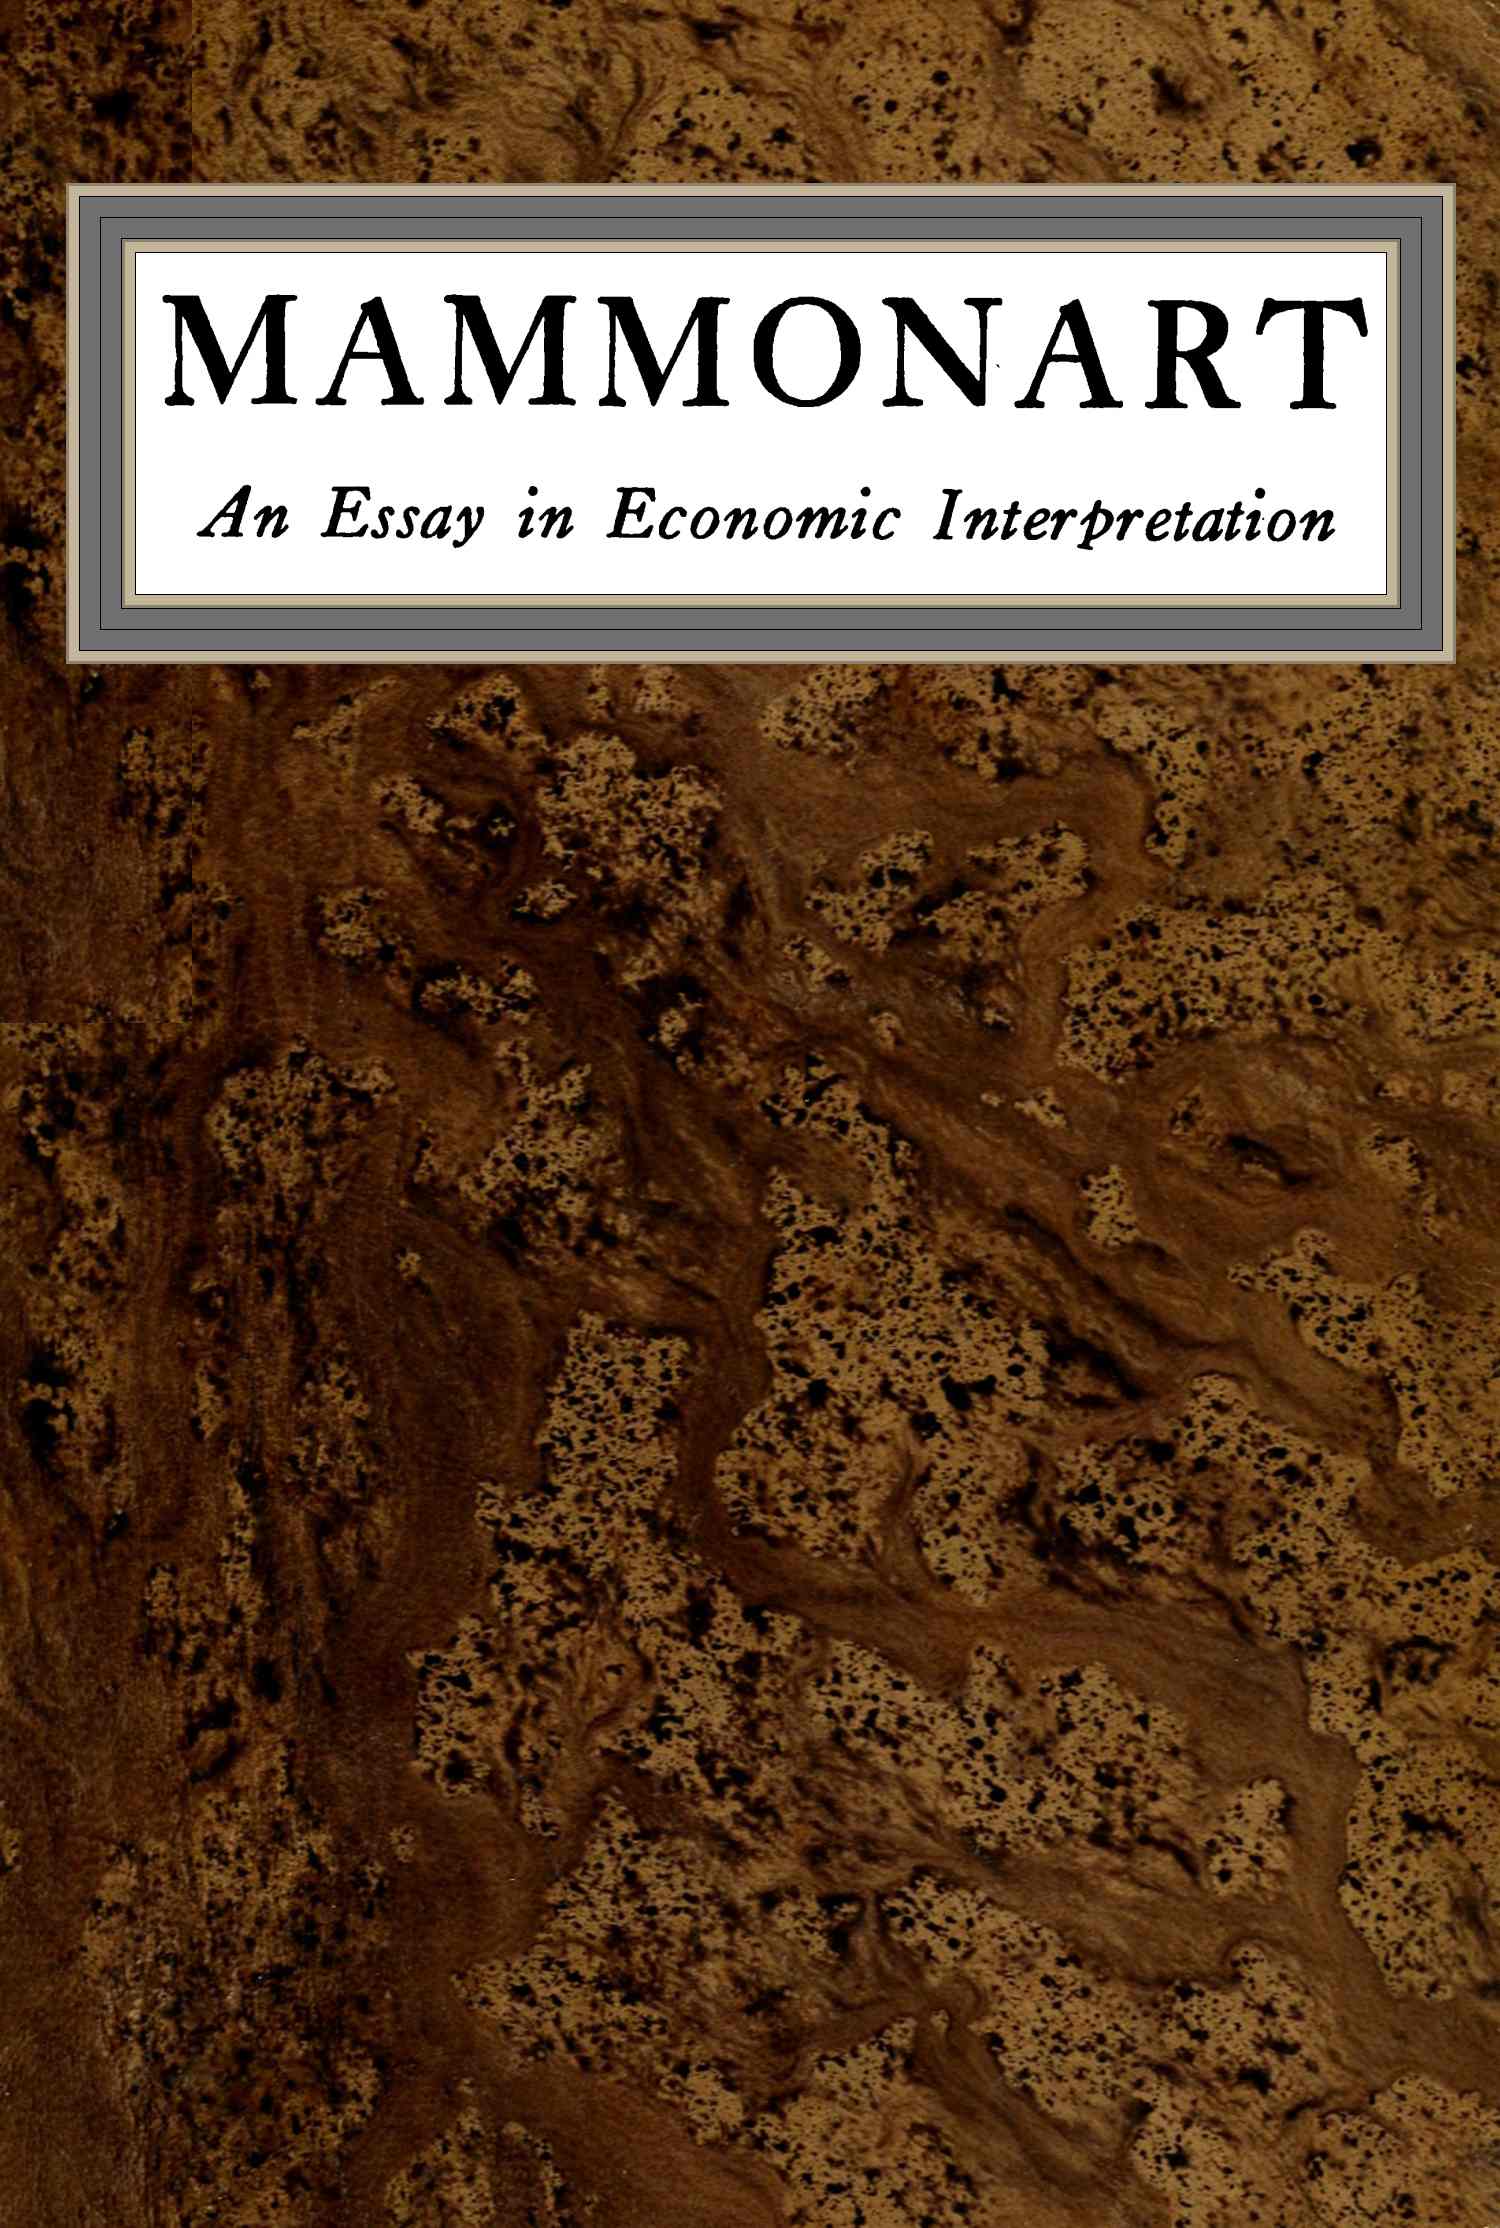 The Project Gutenberg eBook of Mammonart, by Upton Sinclair. photo